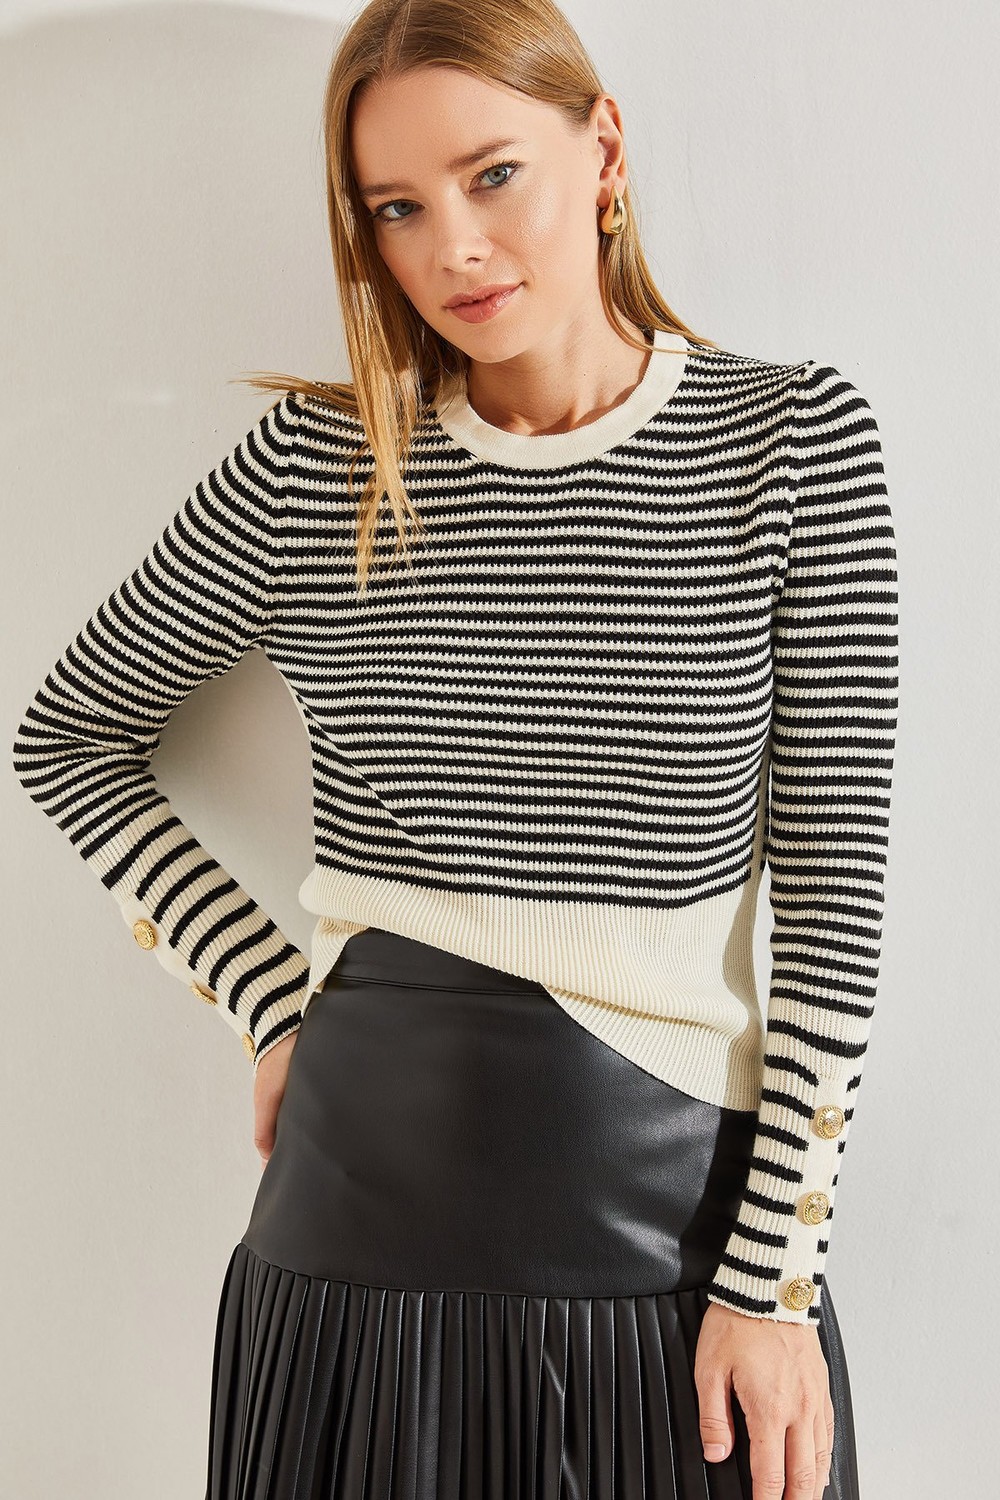 Bianco Lucci Women's Striped Knitwear Sweater with Buttons